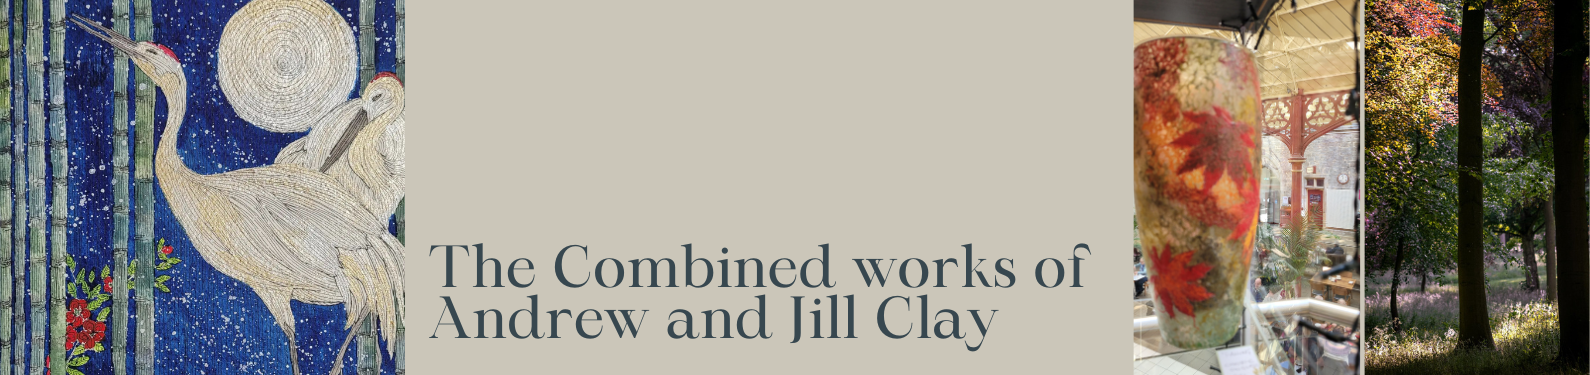 The combined works of Andrew and Jill Clay